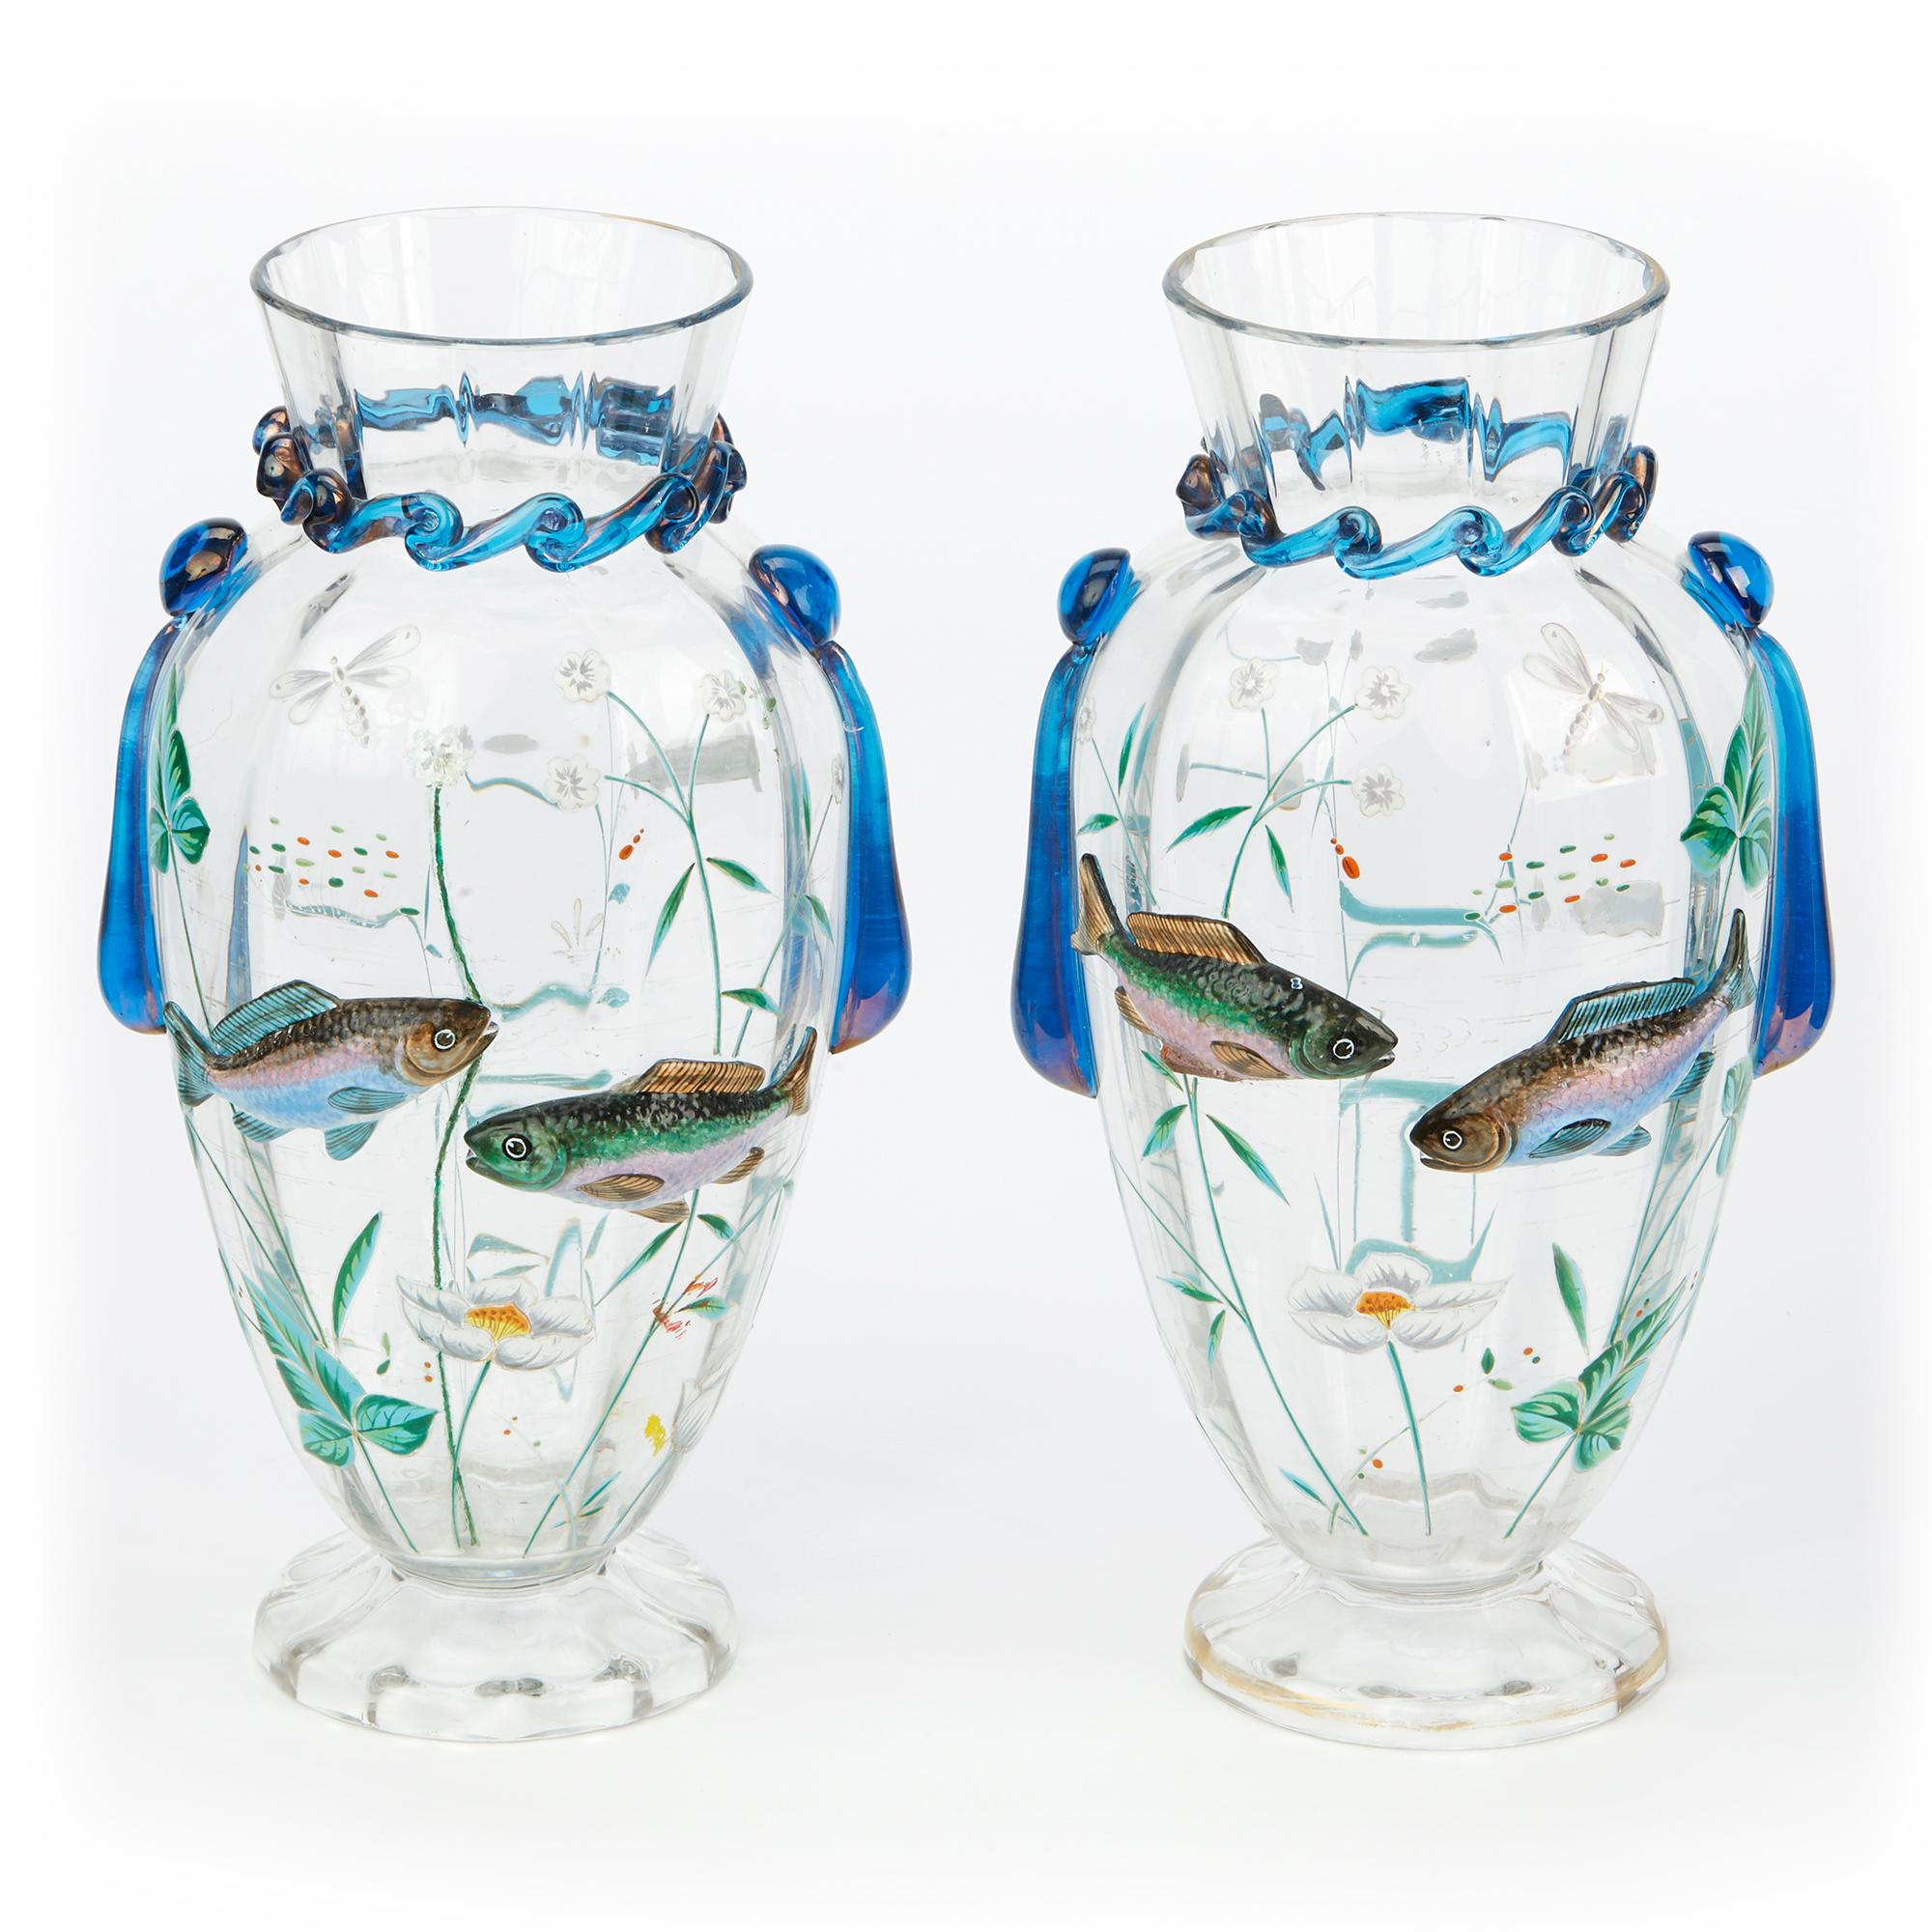 Early 20th Century Pair of Bohemian Harrach Art Glass Vases Applied with Fish, circa 1900